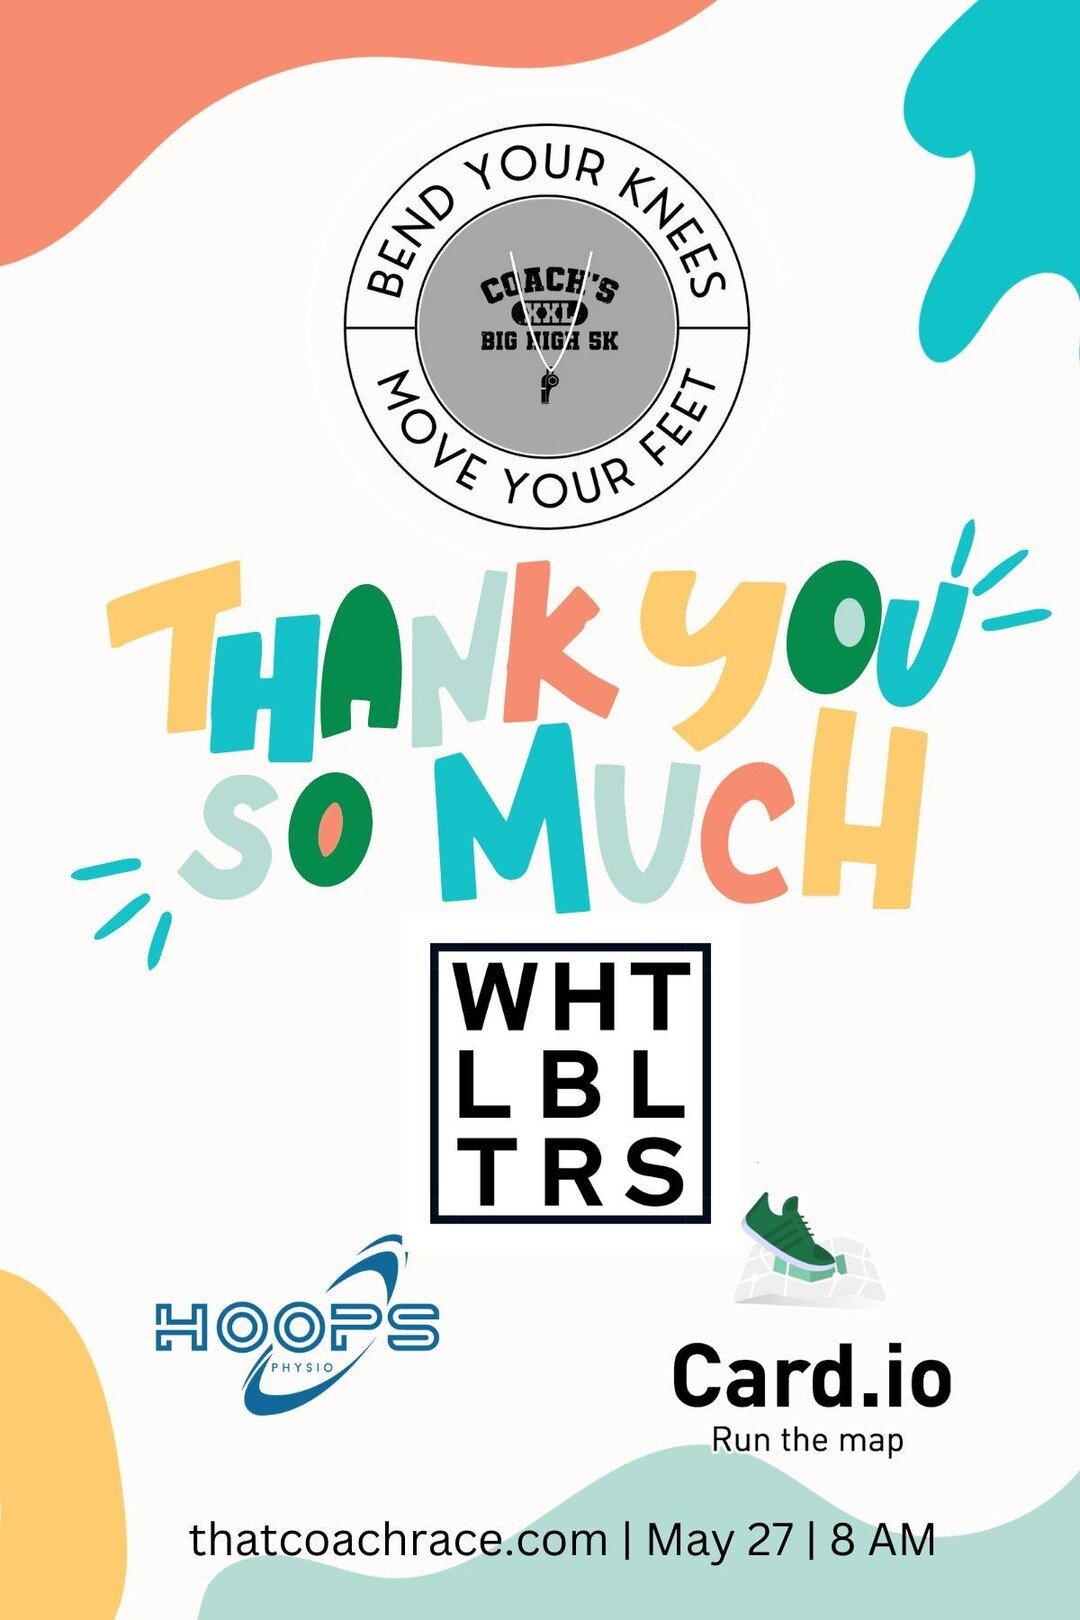 These fine sponsors are making it possible for us to put on a race that honors coaches, mentors, trainers, and teachers! Thank you to @whitelabeltourco @hoopsphysio @thecardioapp_ - - we can't wait to see you on May 27!
thatcoachrace.com
May 27 | 8 A